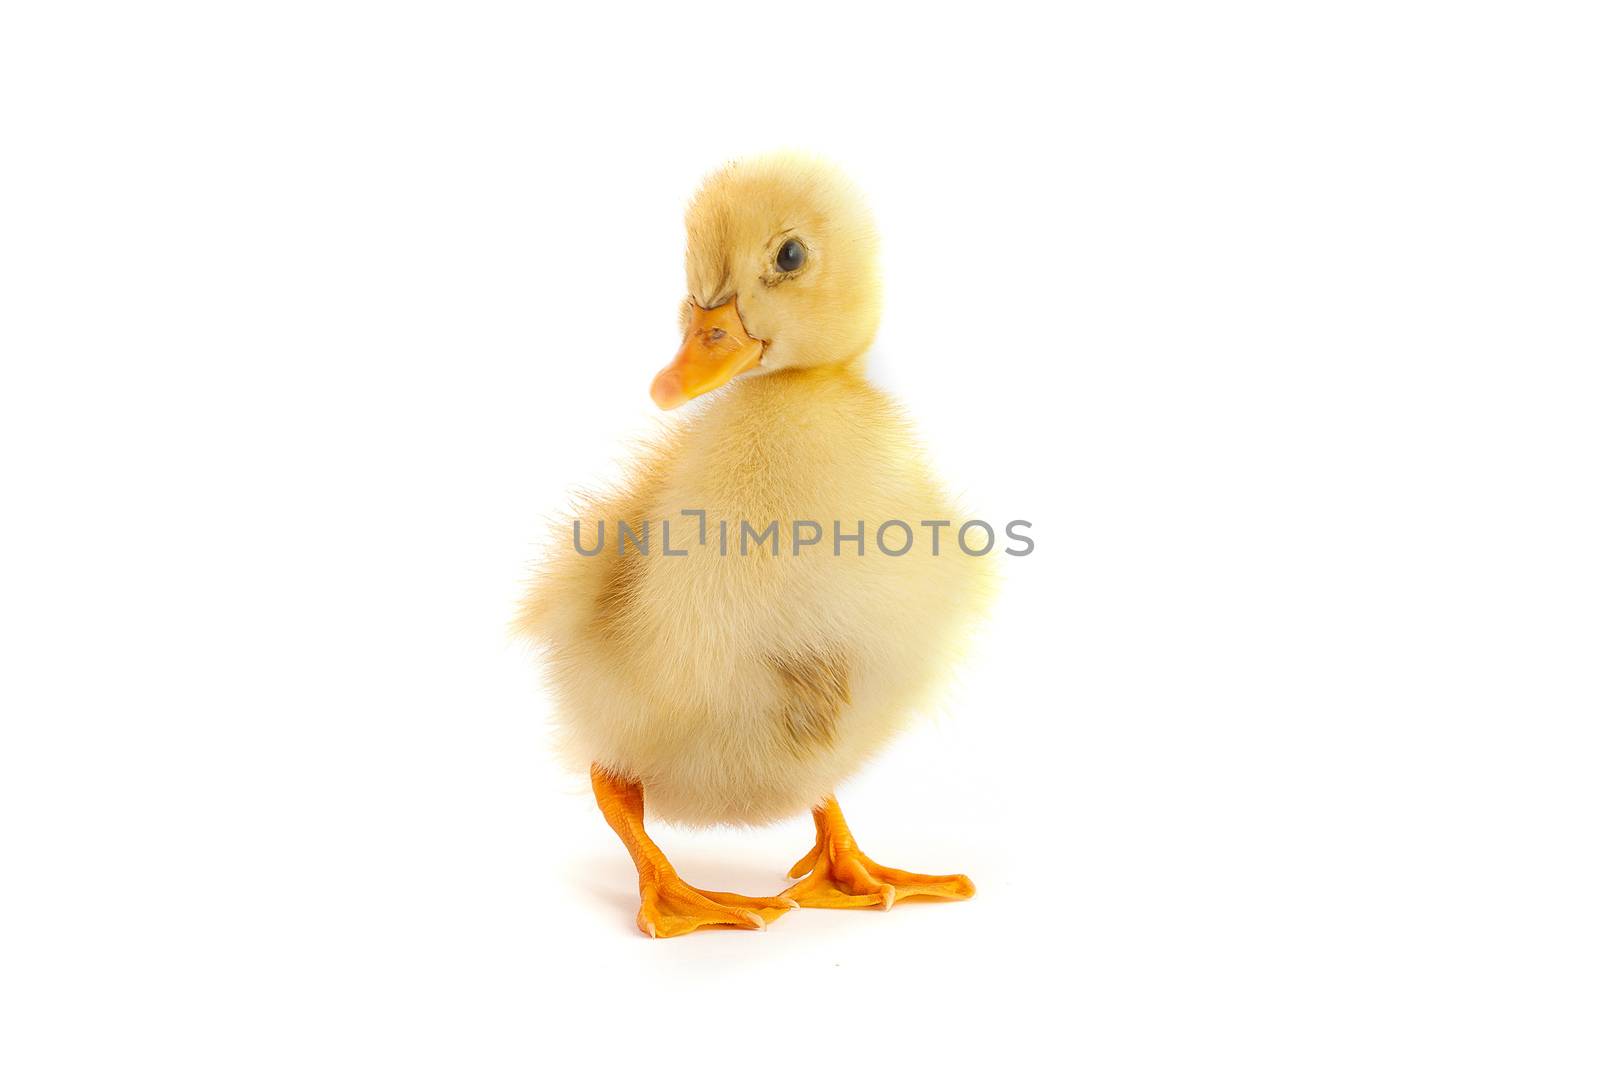 The small yellow duckling isolated on a white background